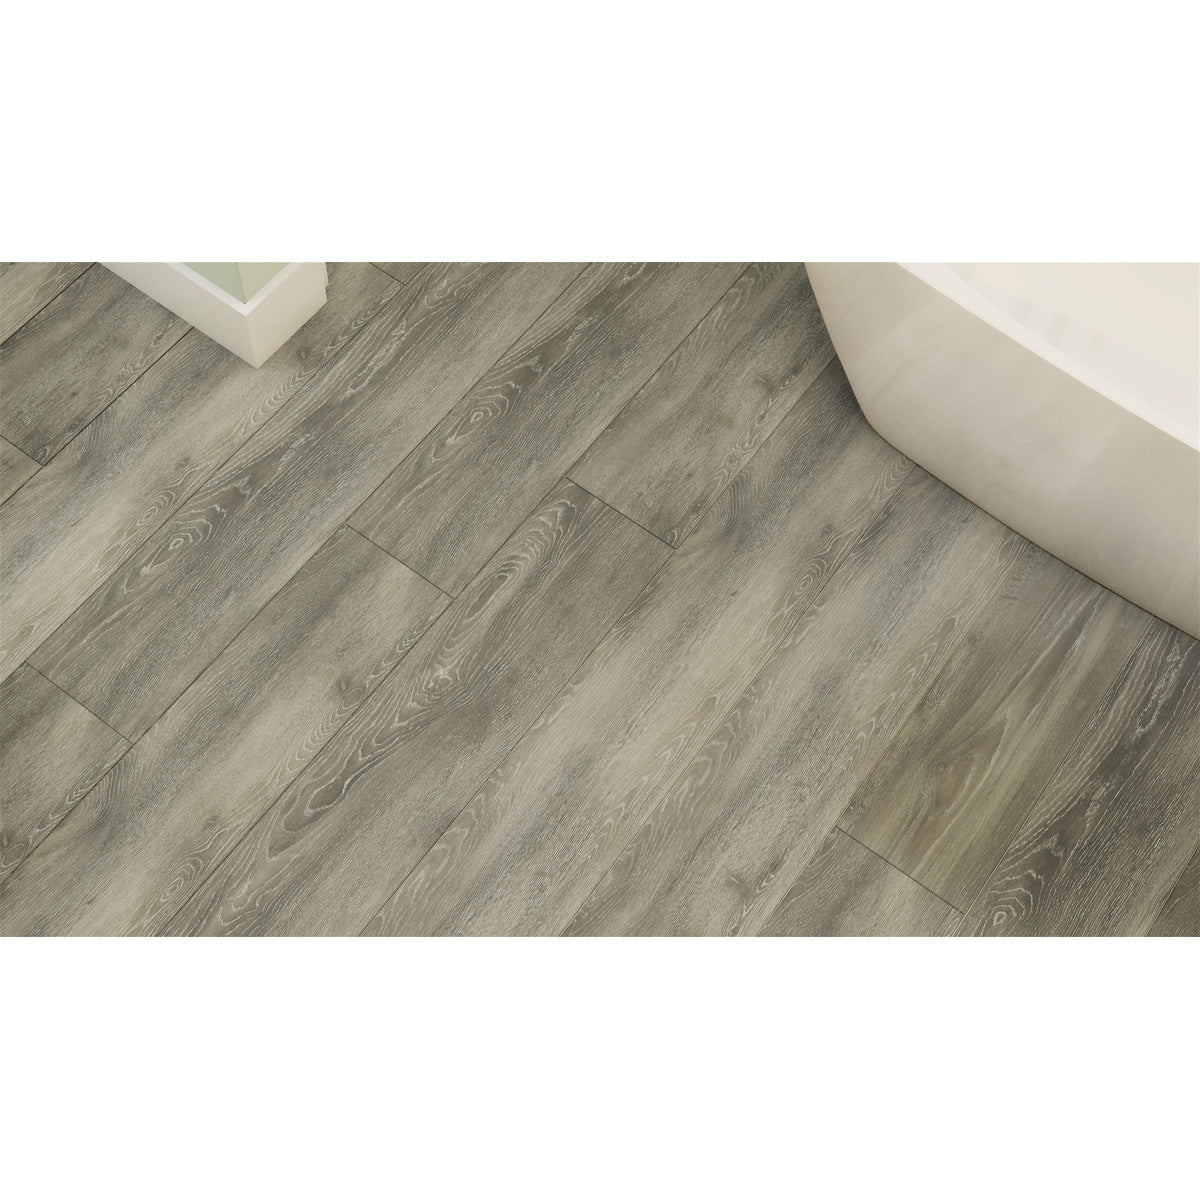 Engineered Floors - Triumph Collection - Bella Sera - 9 in. x 72 in. - Tuscany Installed